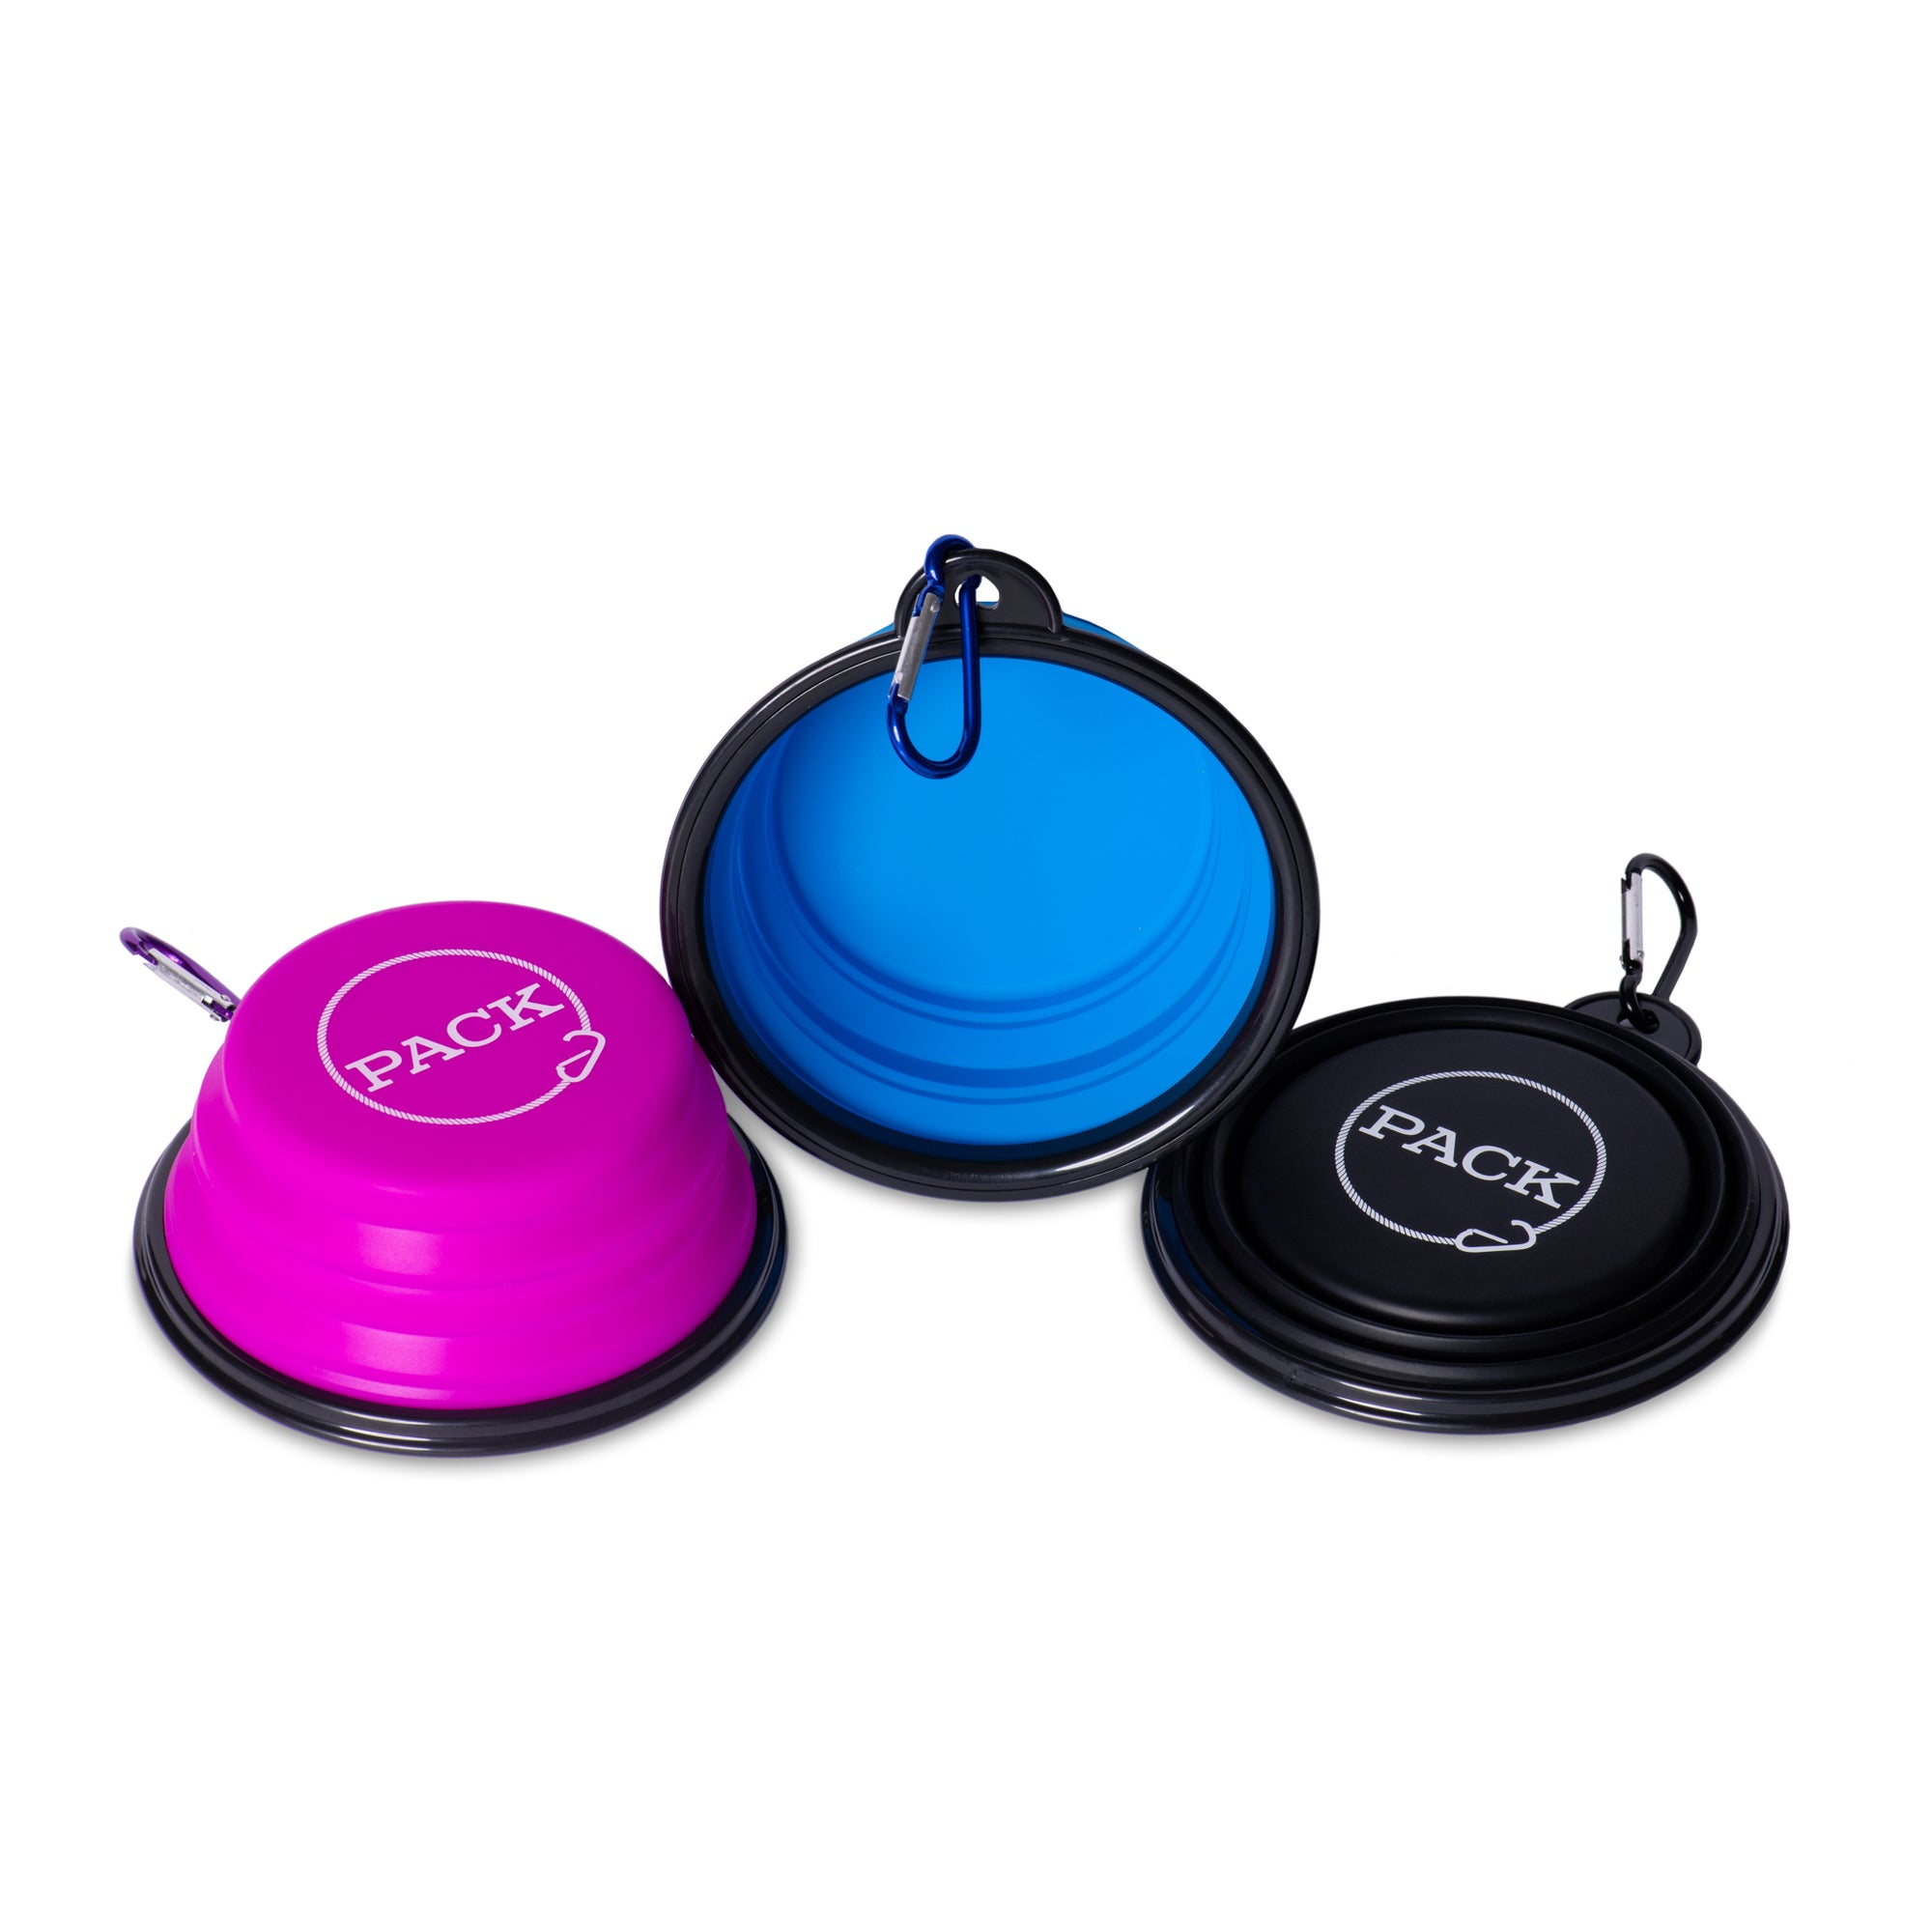 The Pack Bowl - Free Product